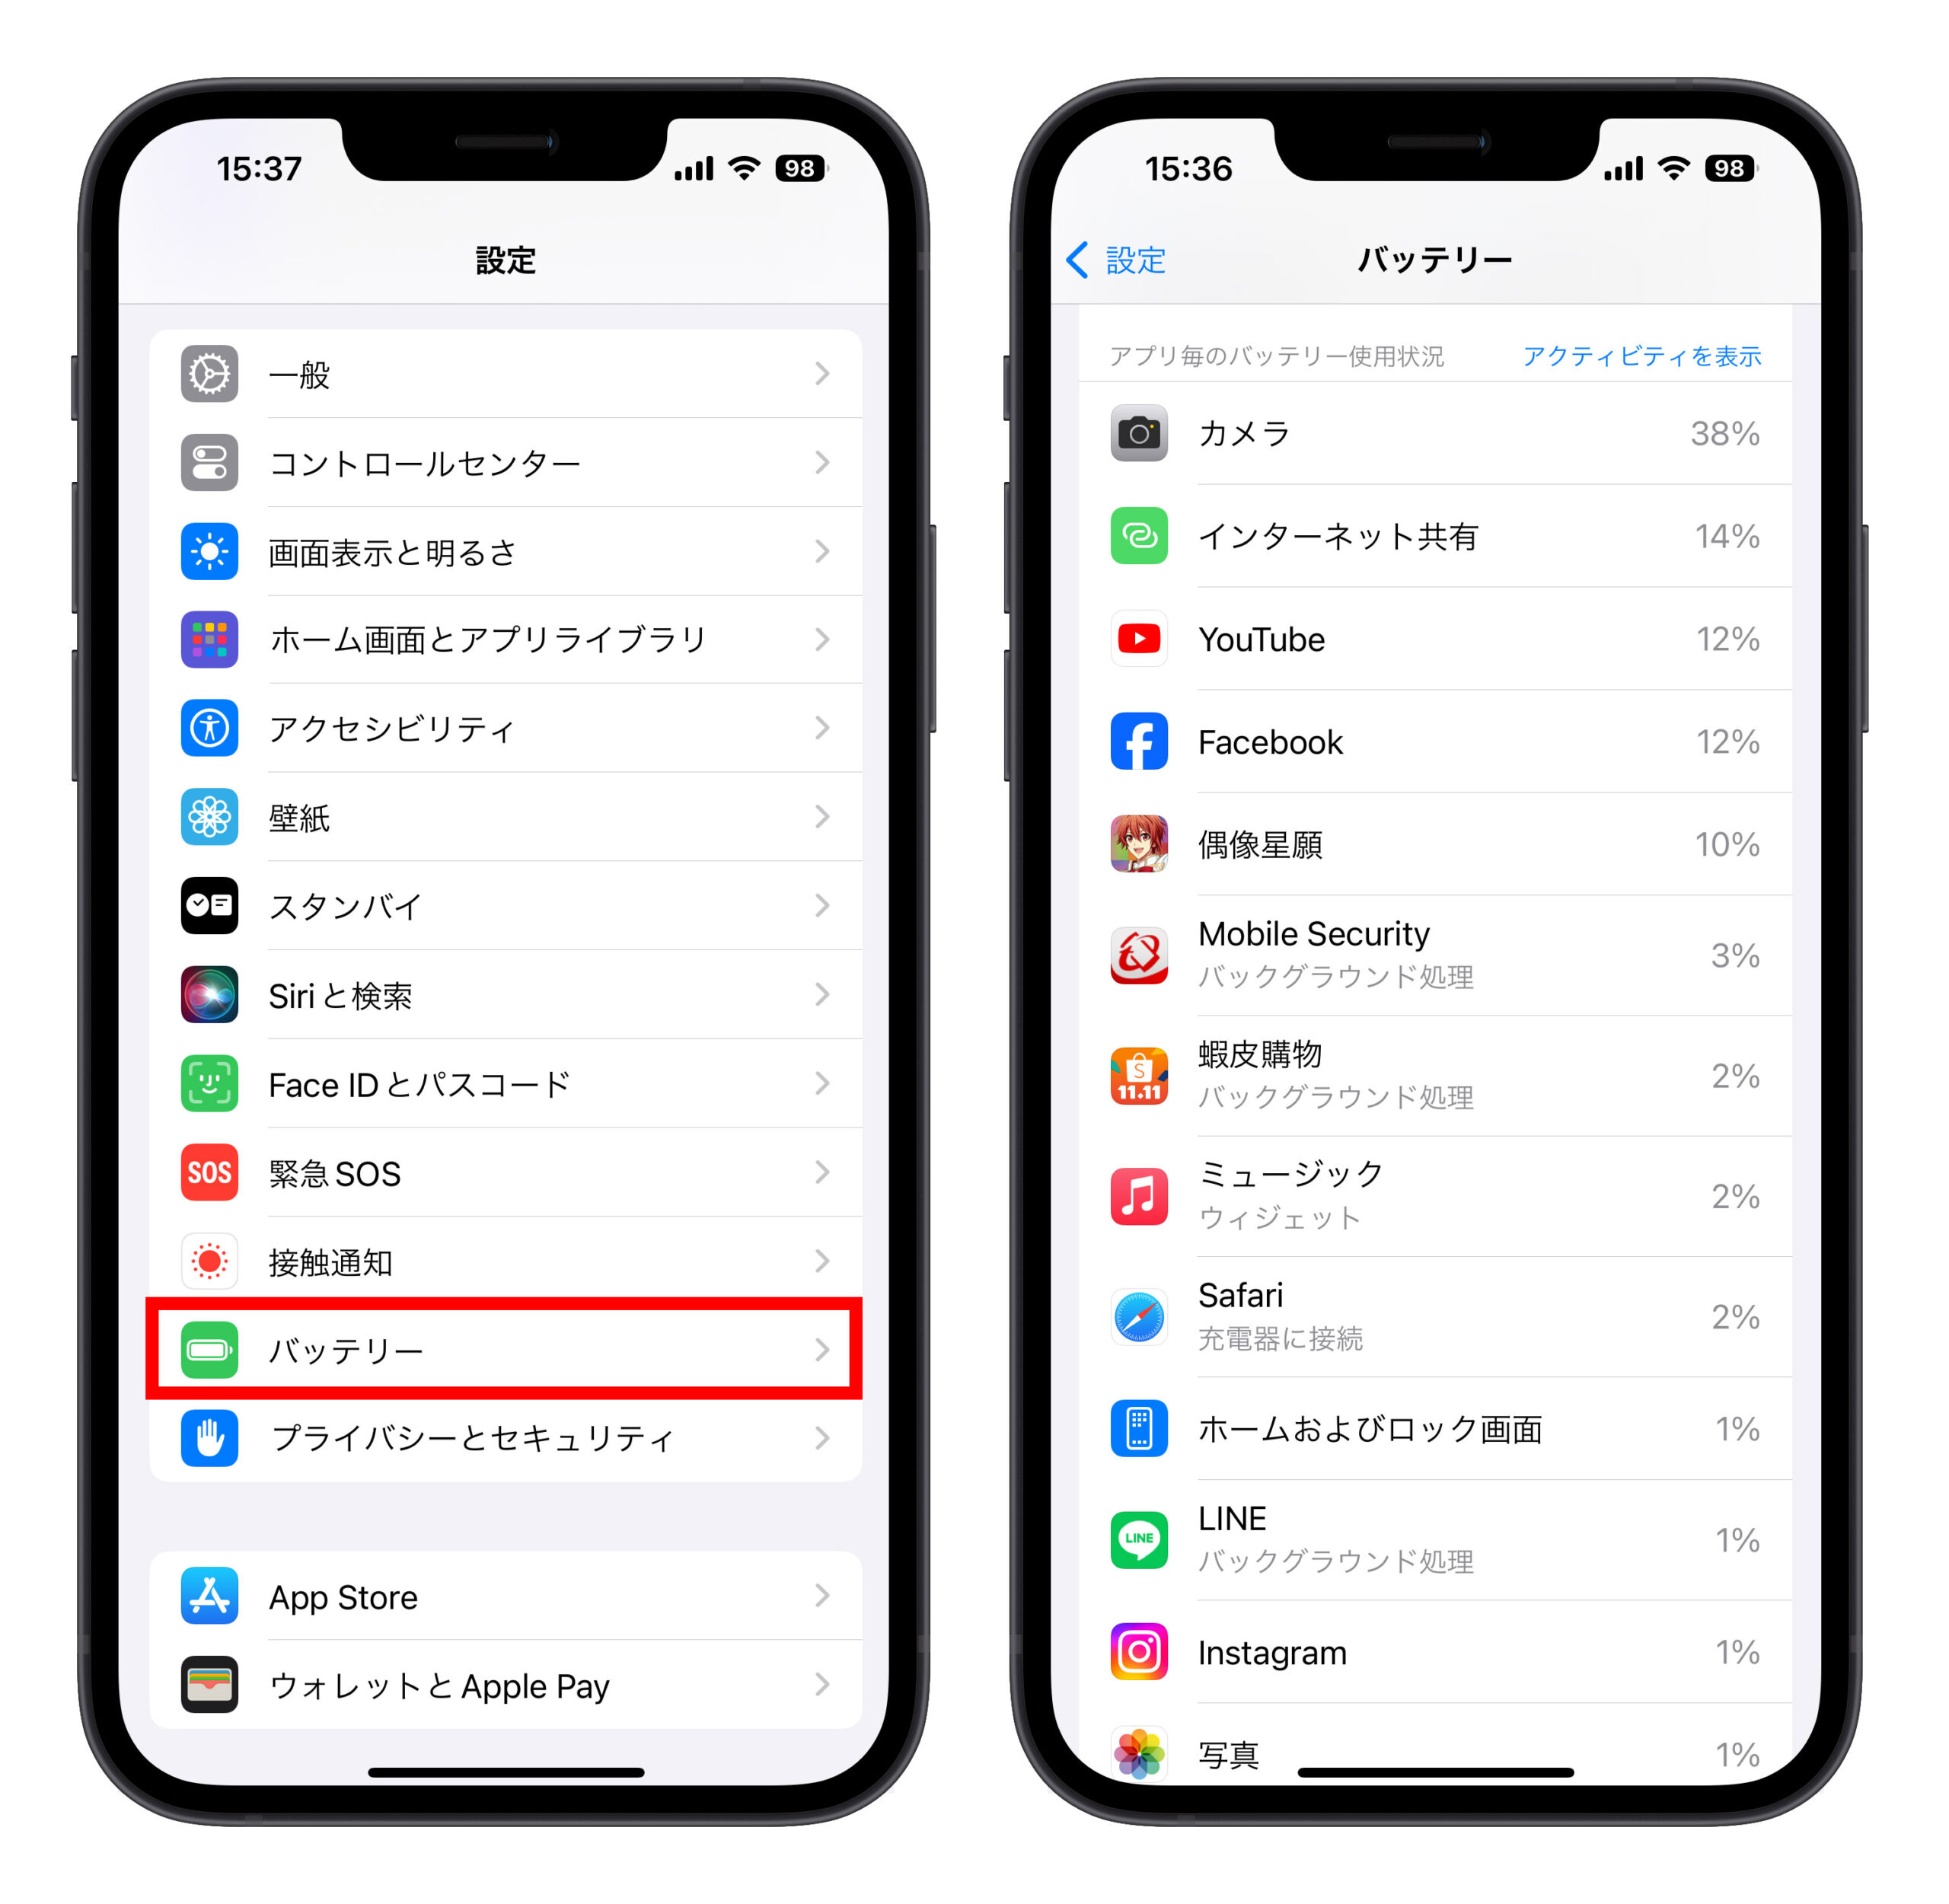 iPhone バッテリー 電力大量消費